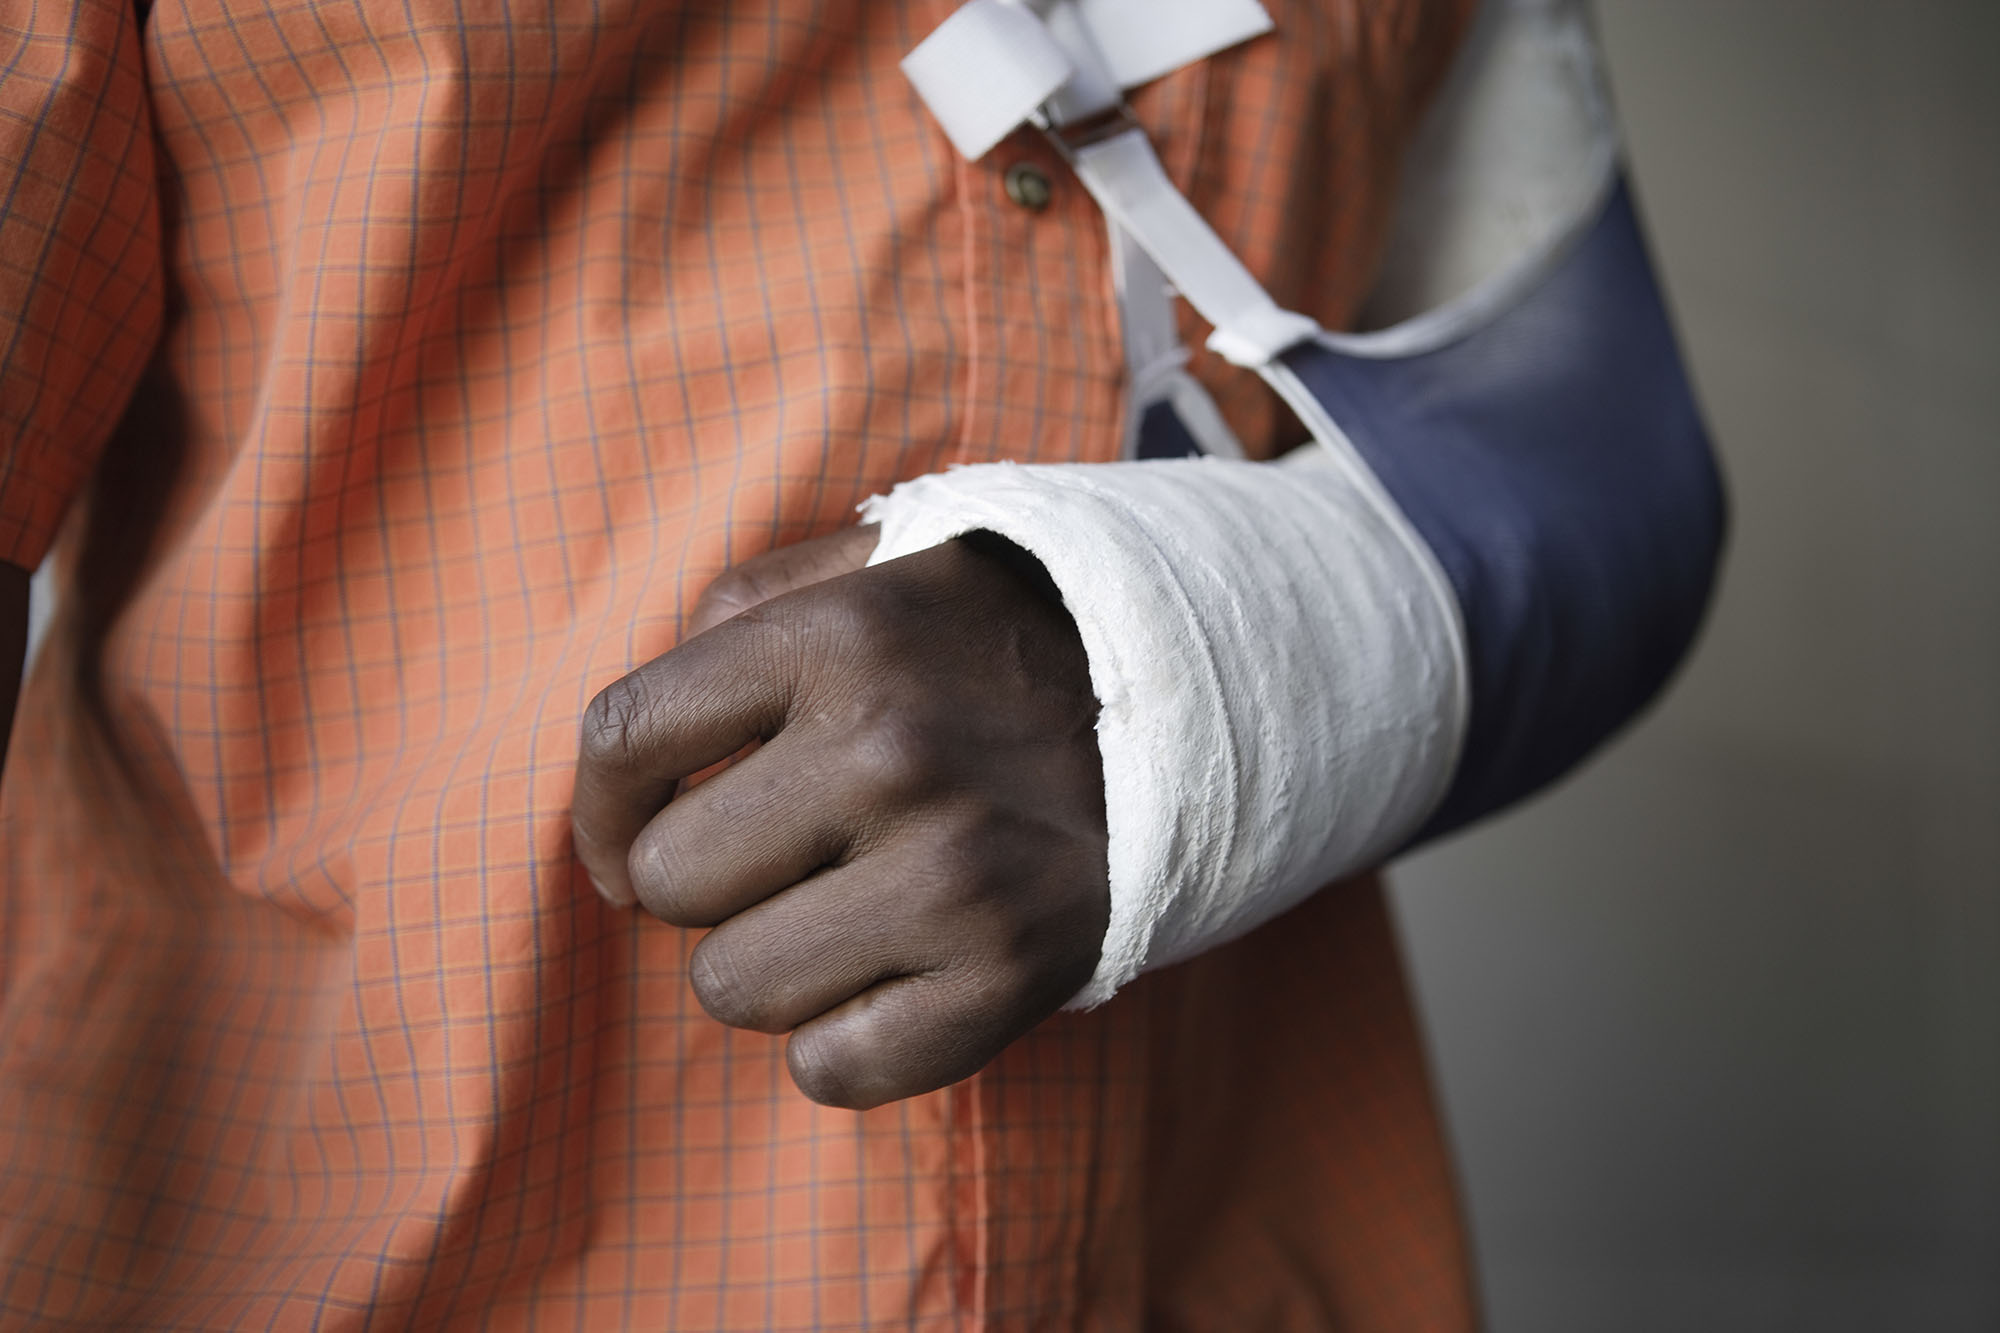 arm injury compensation claim solicitors of Stockport